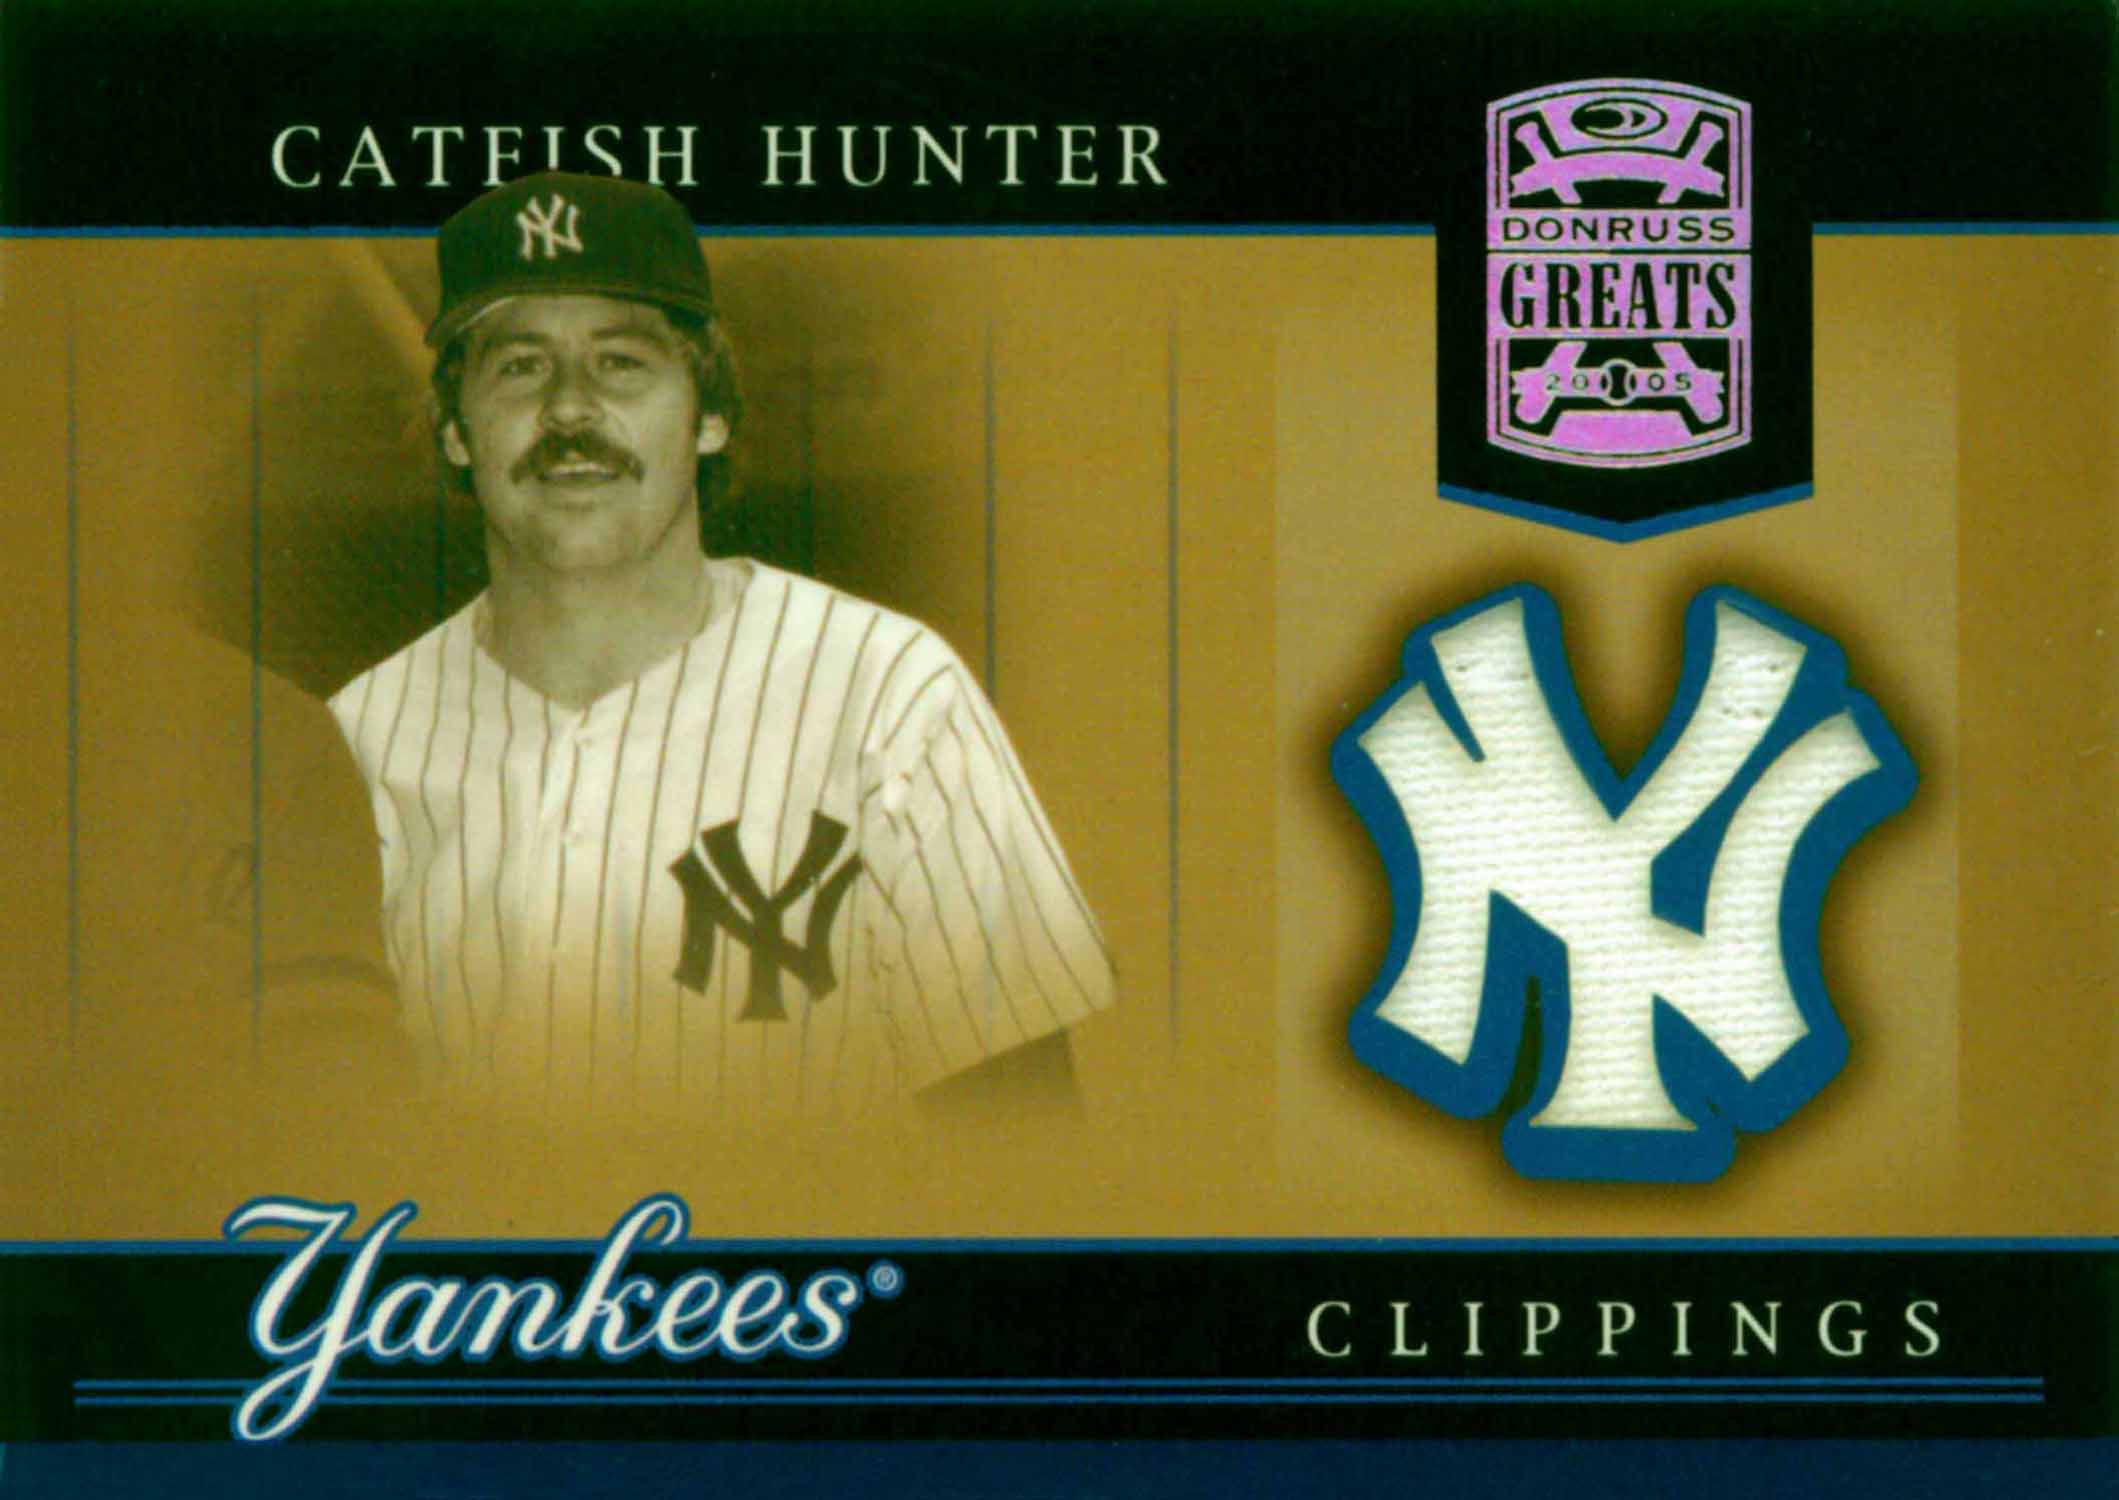 2005 Donruss Greats Yankee Clippings Material Jersey